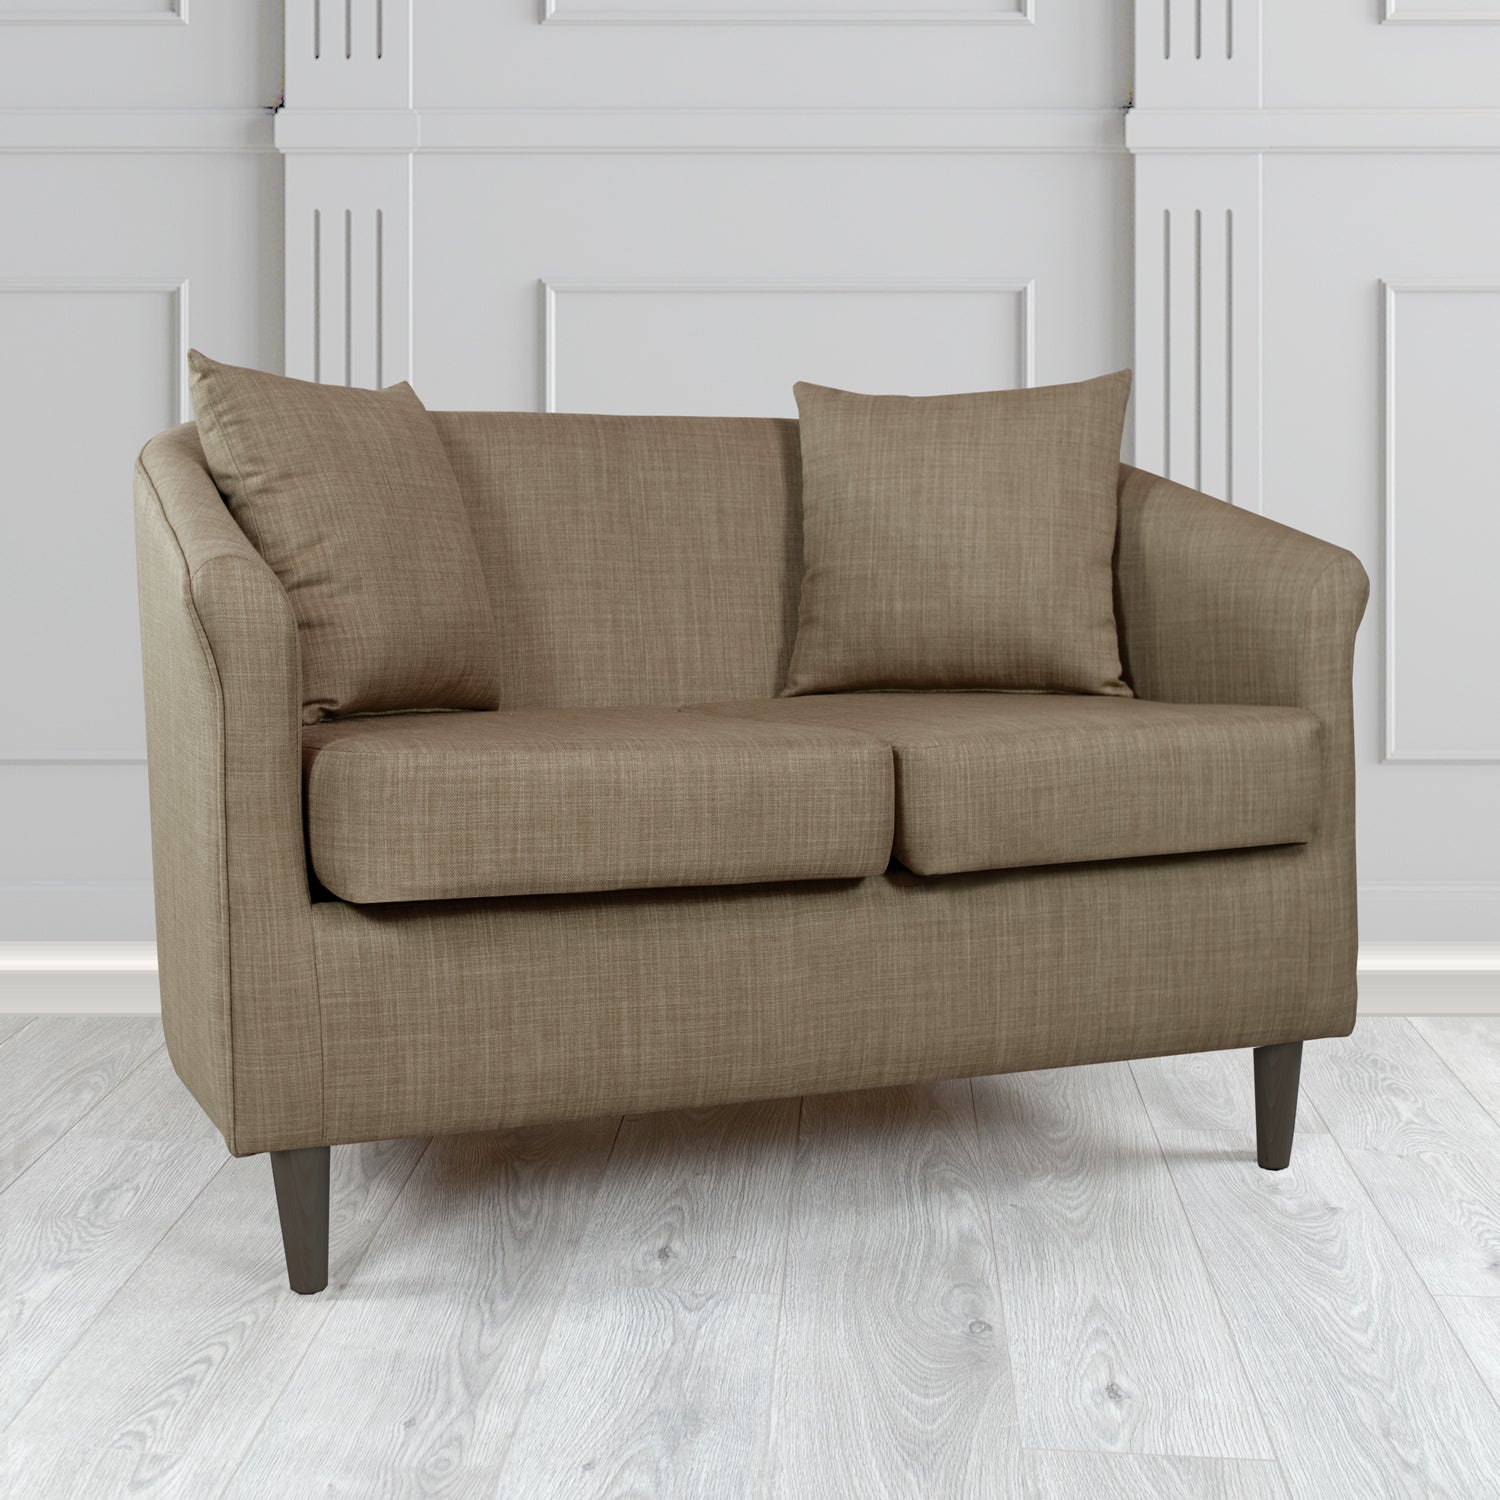 St Tropez Charles Nutmeg Plain Linen Fabric 2 Seater Tub Sofa with Scatter Cushions - The Tub Chair Shop